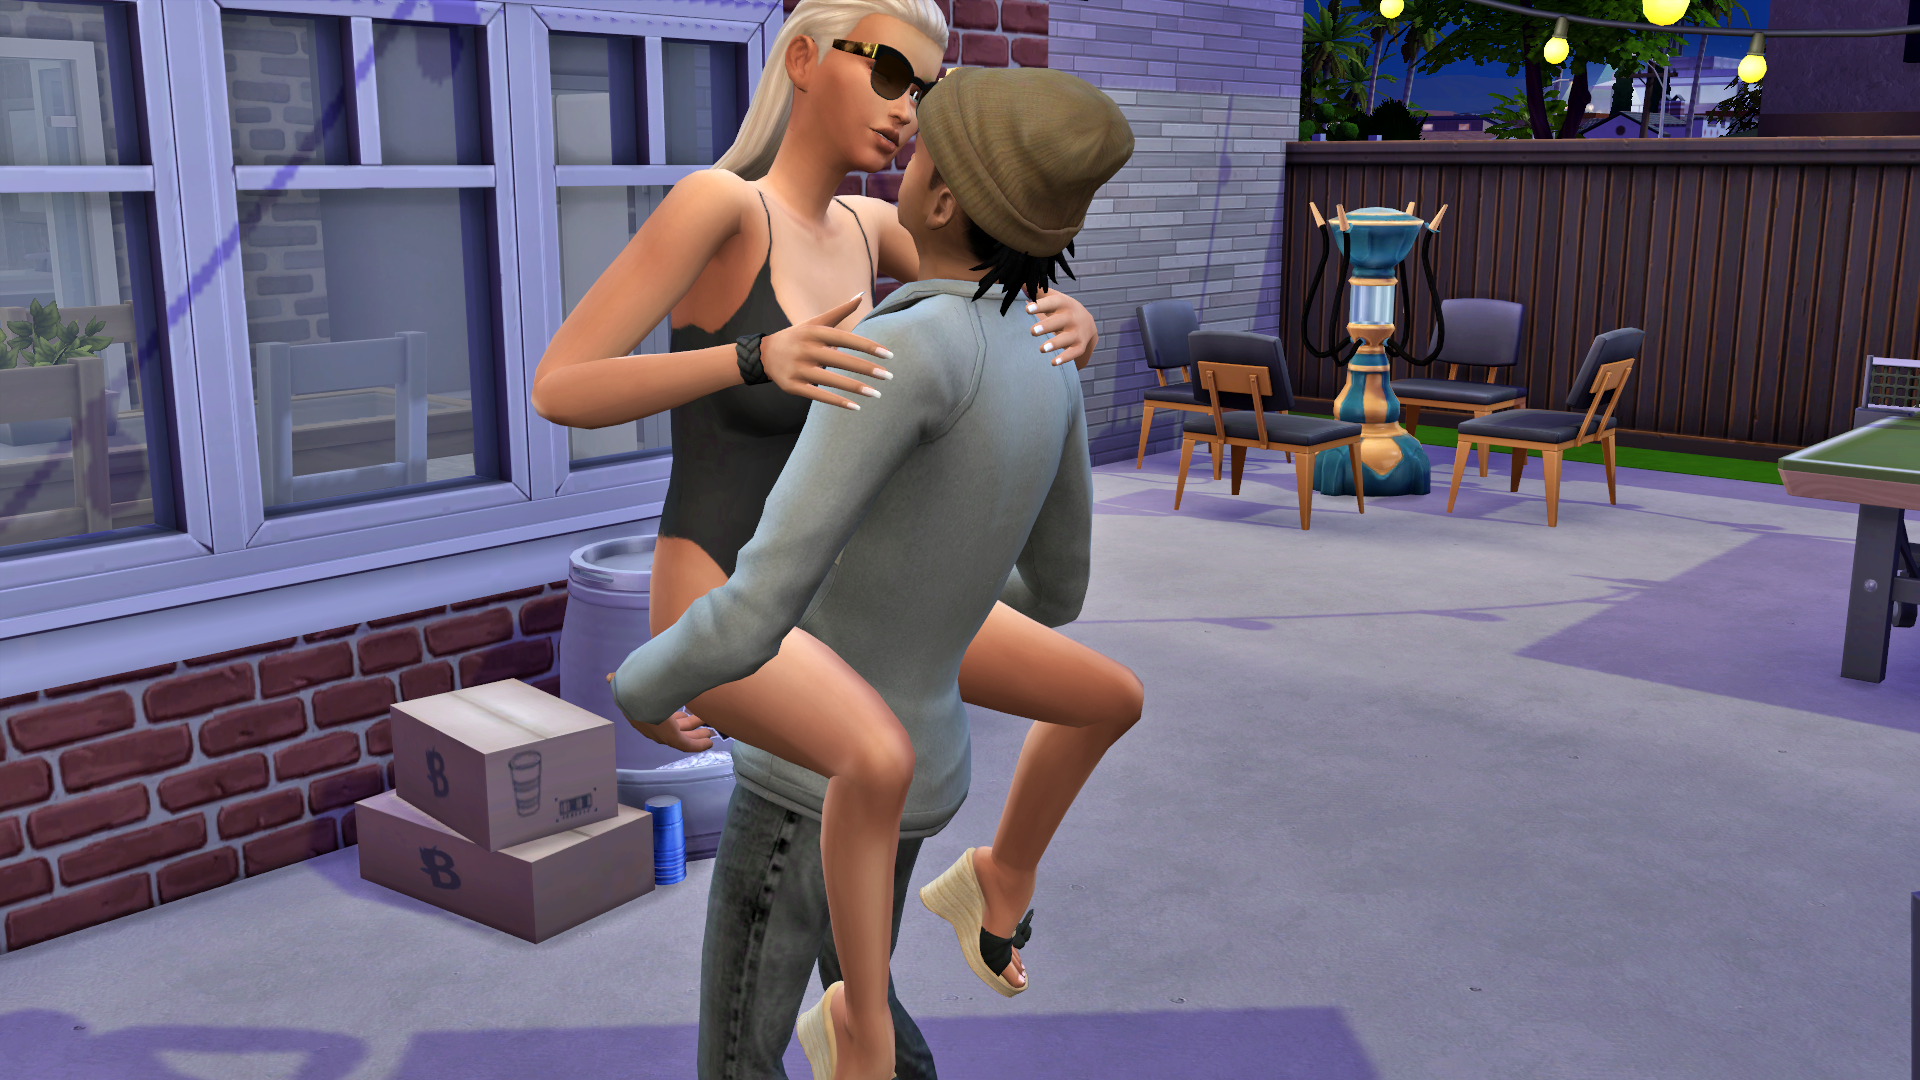 The Sims 4 Post Your Adult Goodies Screens Vids Etc.